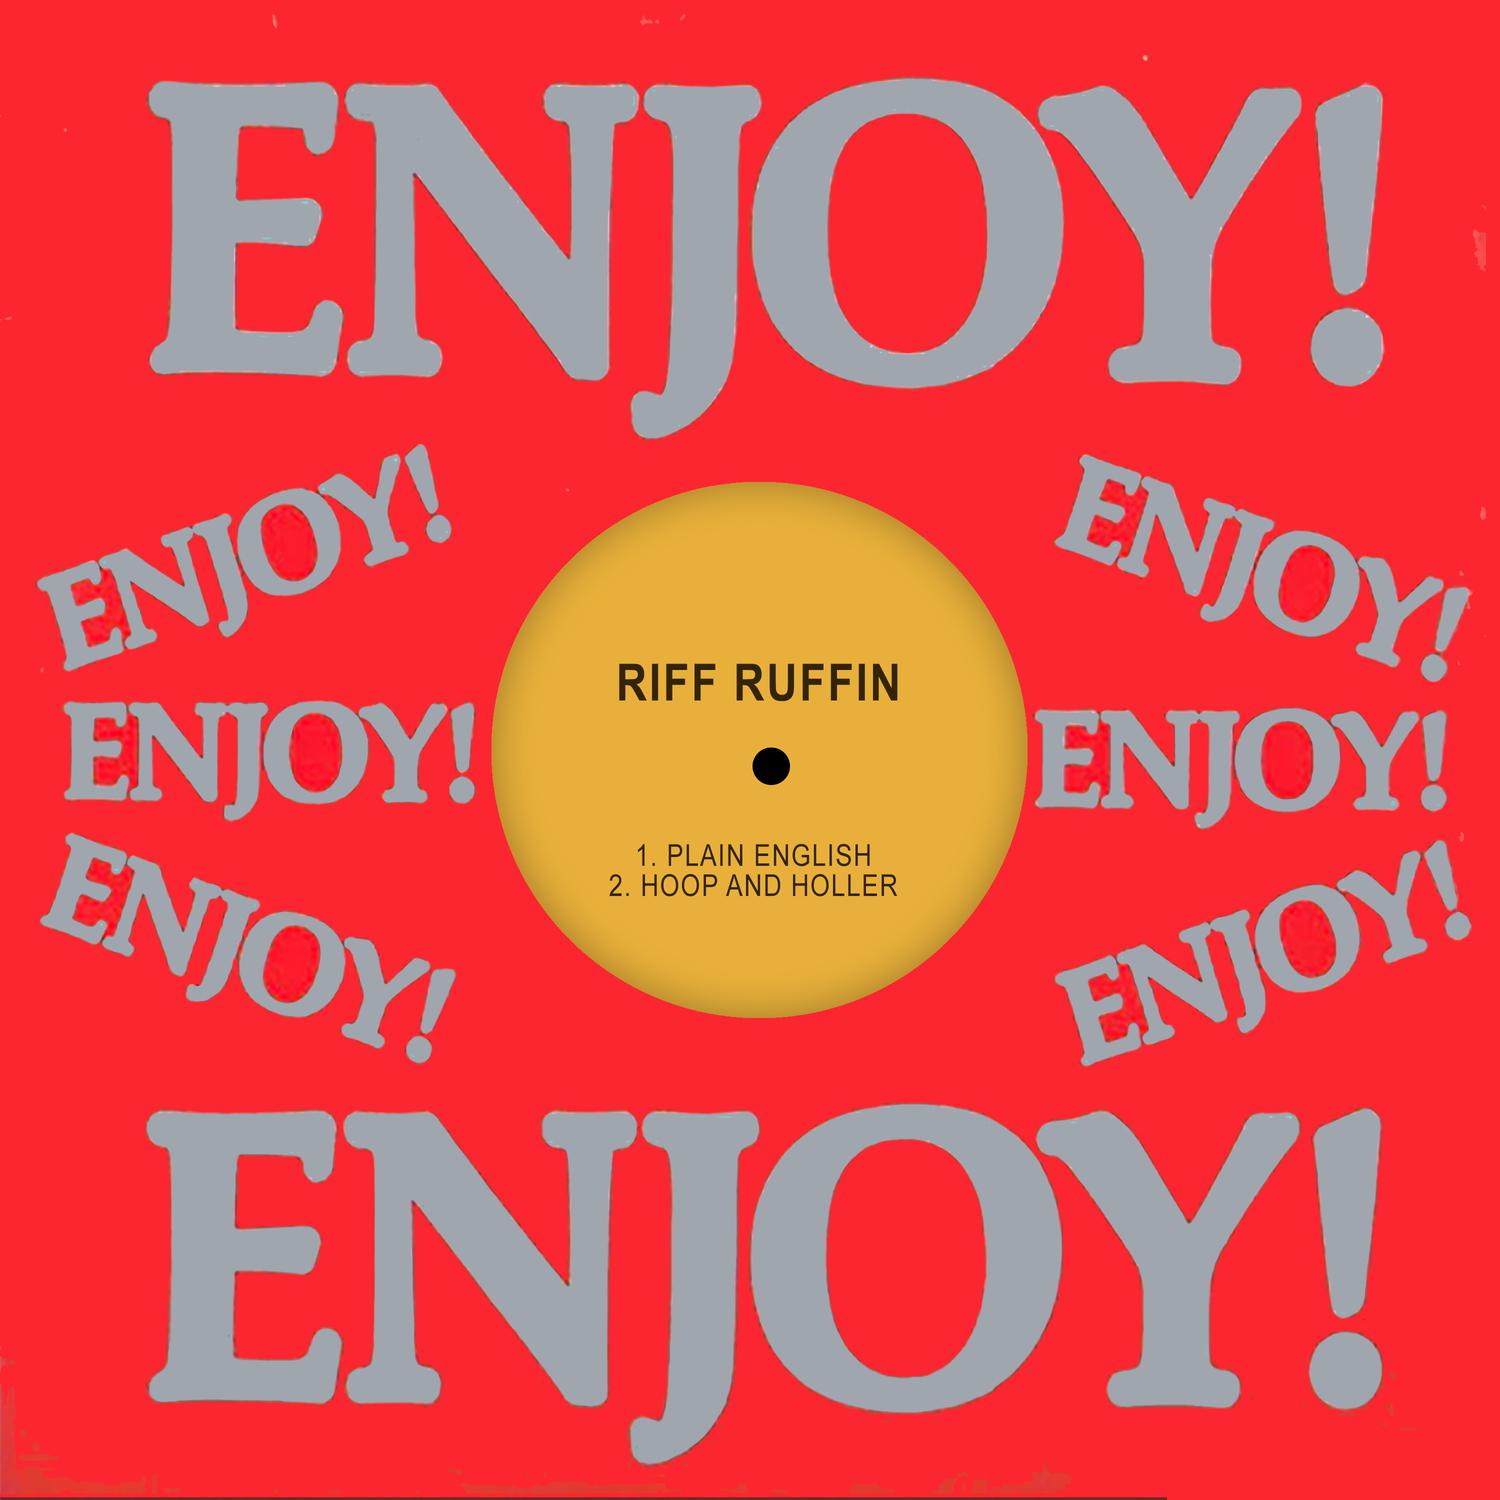 Riff Ruffin - Hoop and Holler